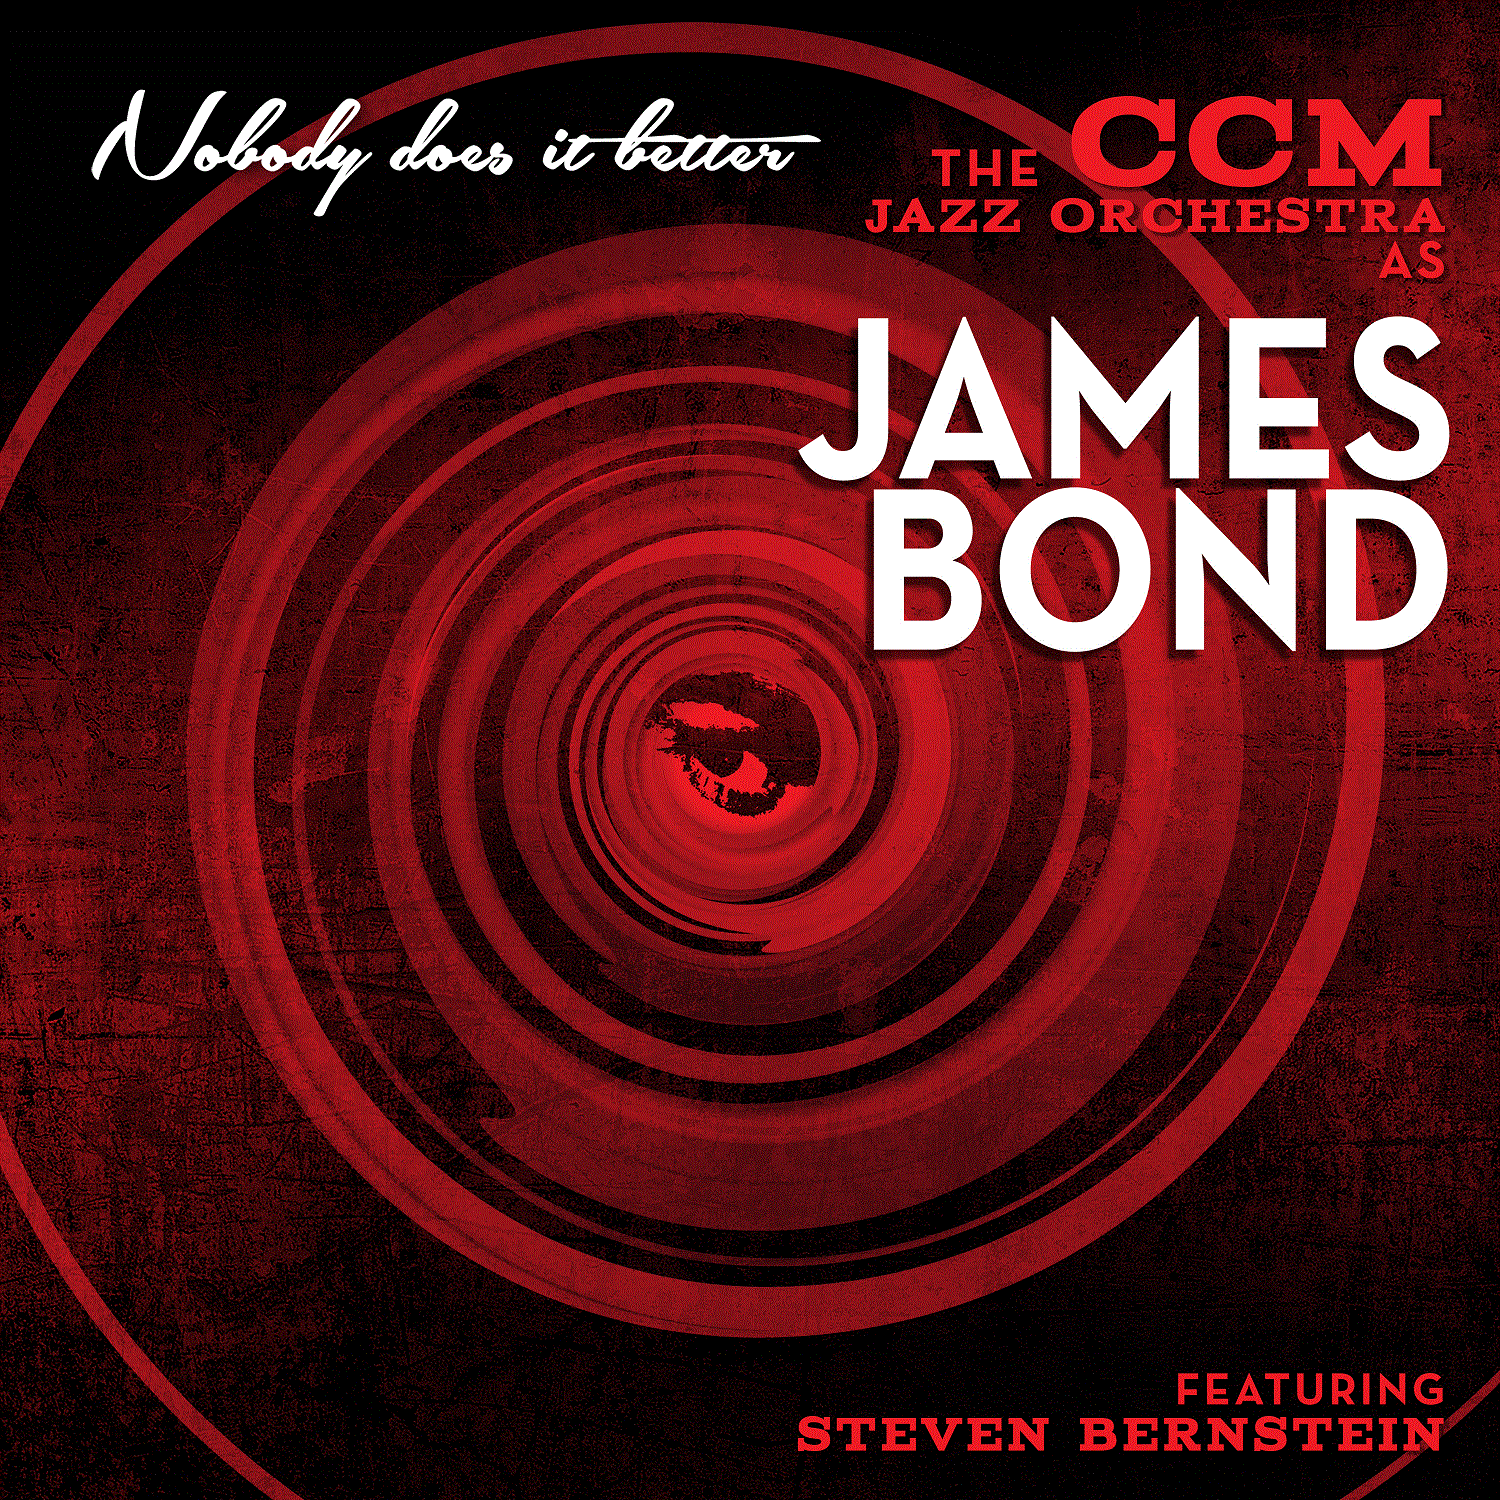 THE CCM (CINCINNATI CONSERVATORY OF MUSIC) JAZZ ORCHESTRA - Nobody Does it Better : James Bond cover 